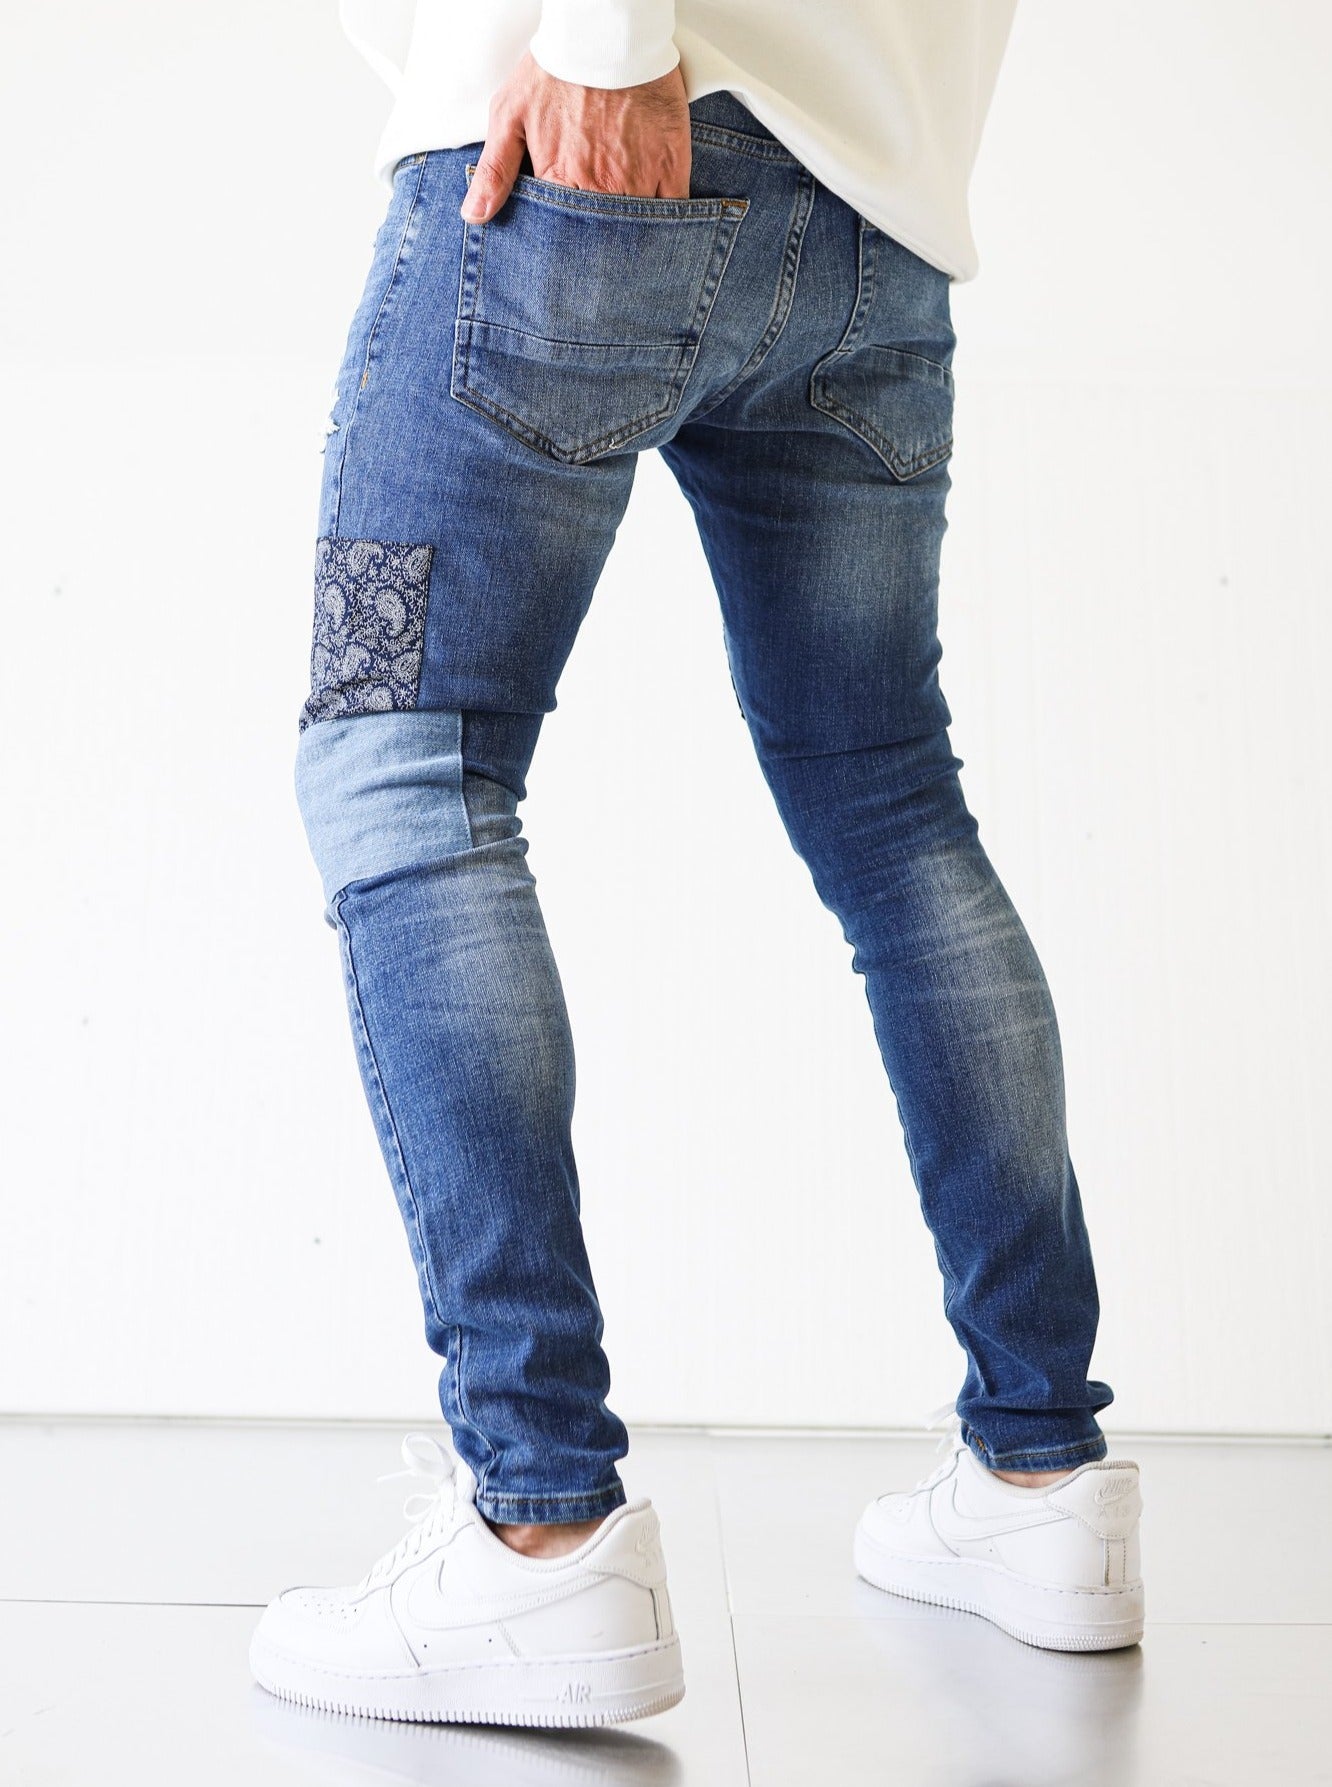 Patched Blue Skinny Jeans - UNEFFECTED STUDIOS® - JEANS - UNEFFECTED